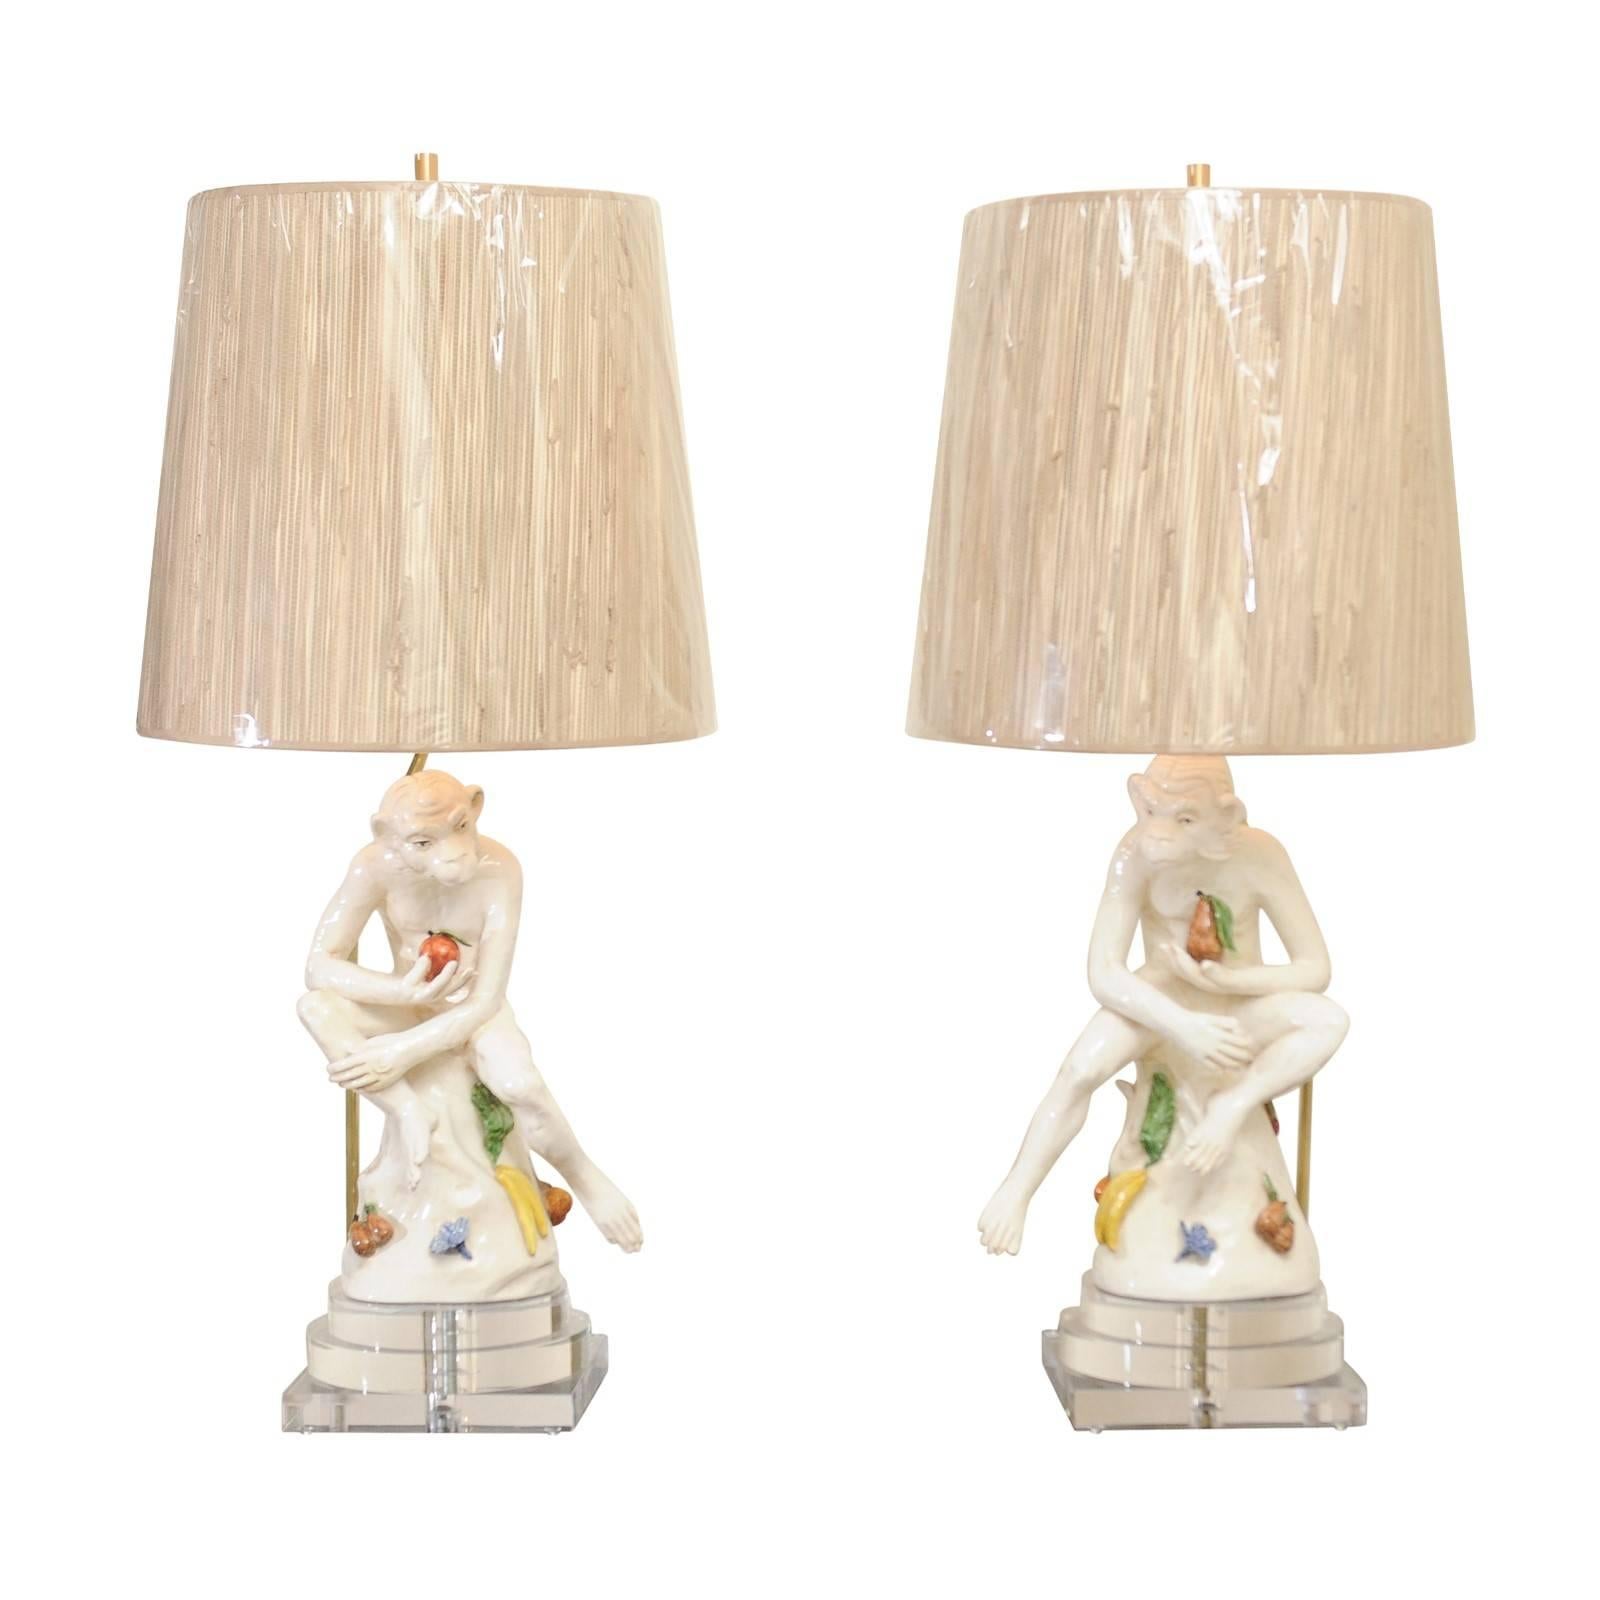 Extraordinary Pair of Italian Monkey Sculptures, circa 1970, as Custom Lamps For Sale